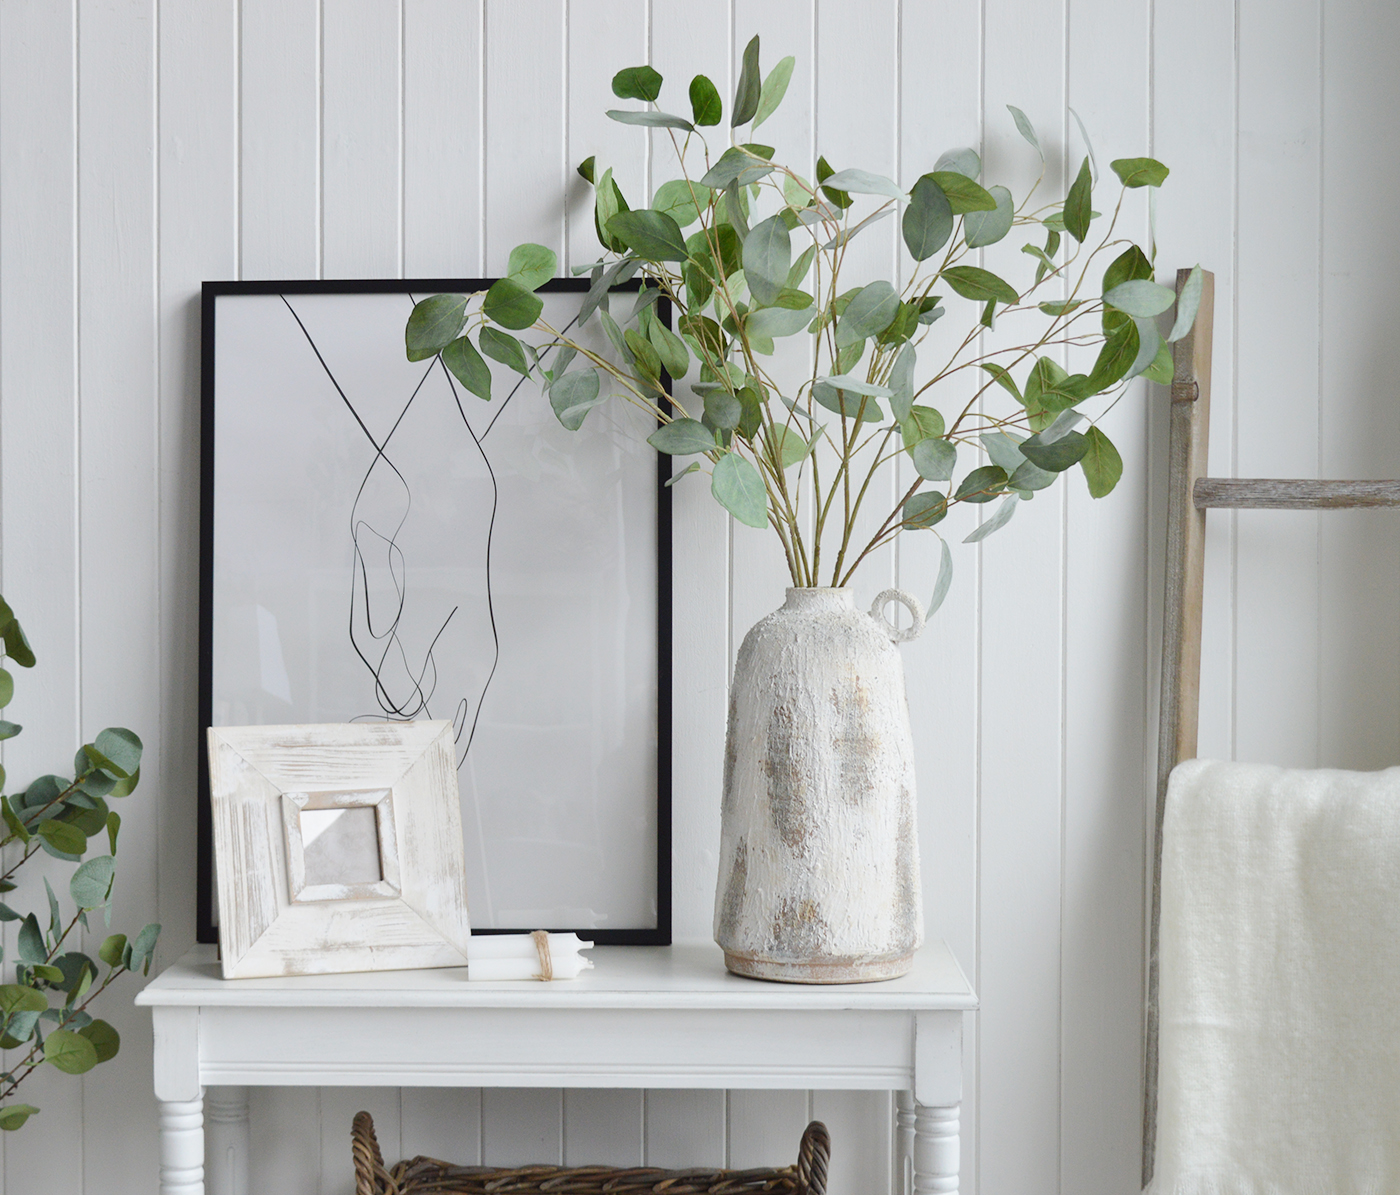 Hamden White Rustic Stone Vase - Console table styling for New England and Hamptons Interiors, New England style furniture and accessories for country, coastal, city and modern farmhouse homes